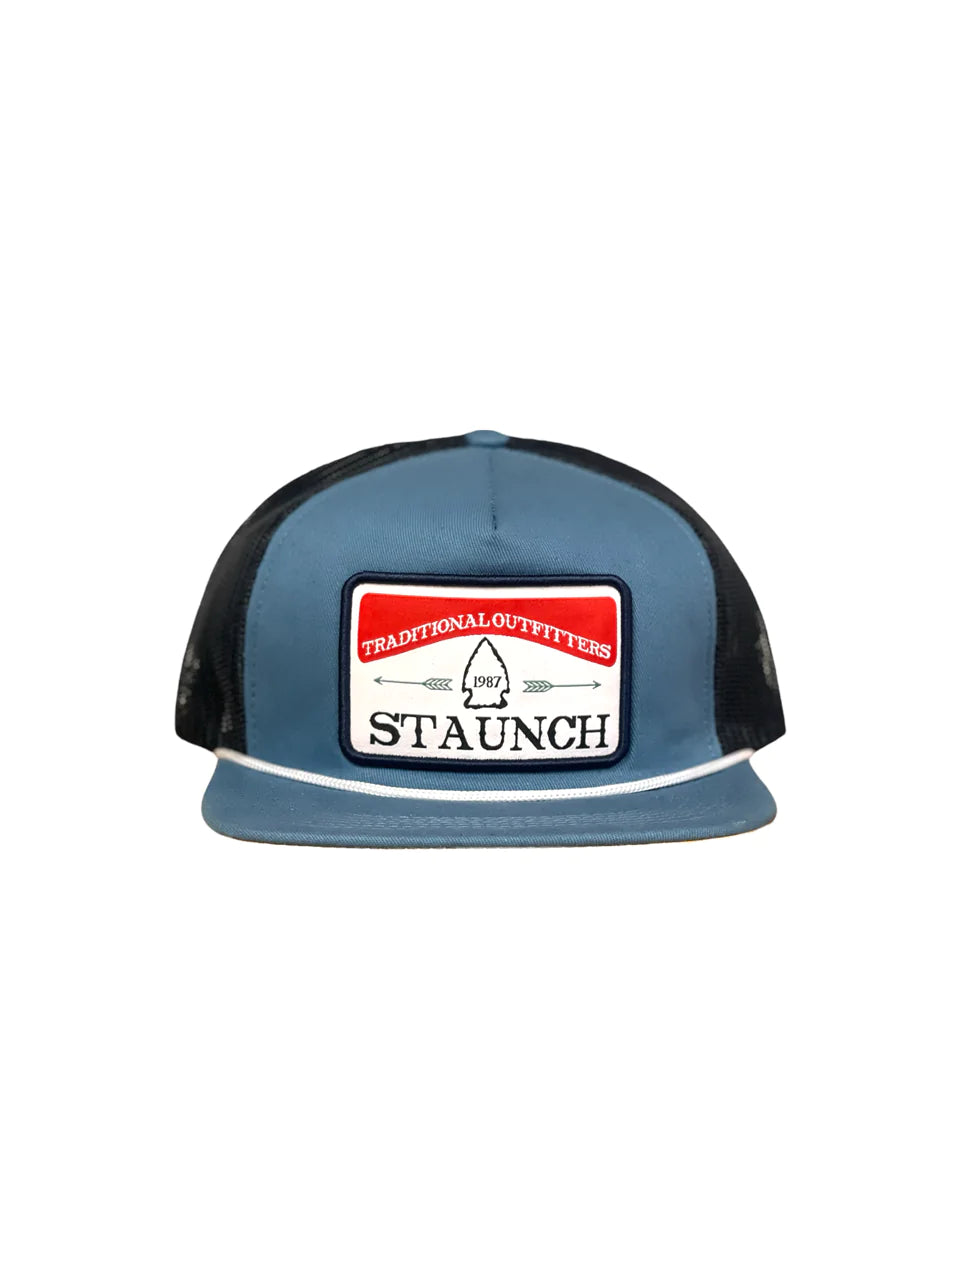 The Staunch Cap